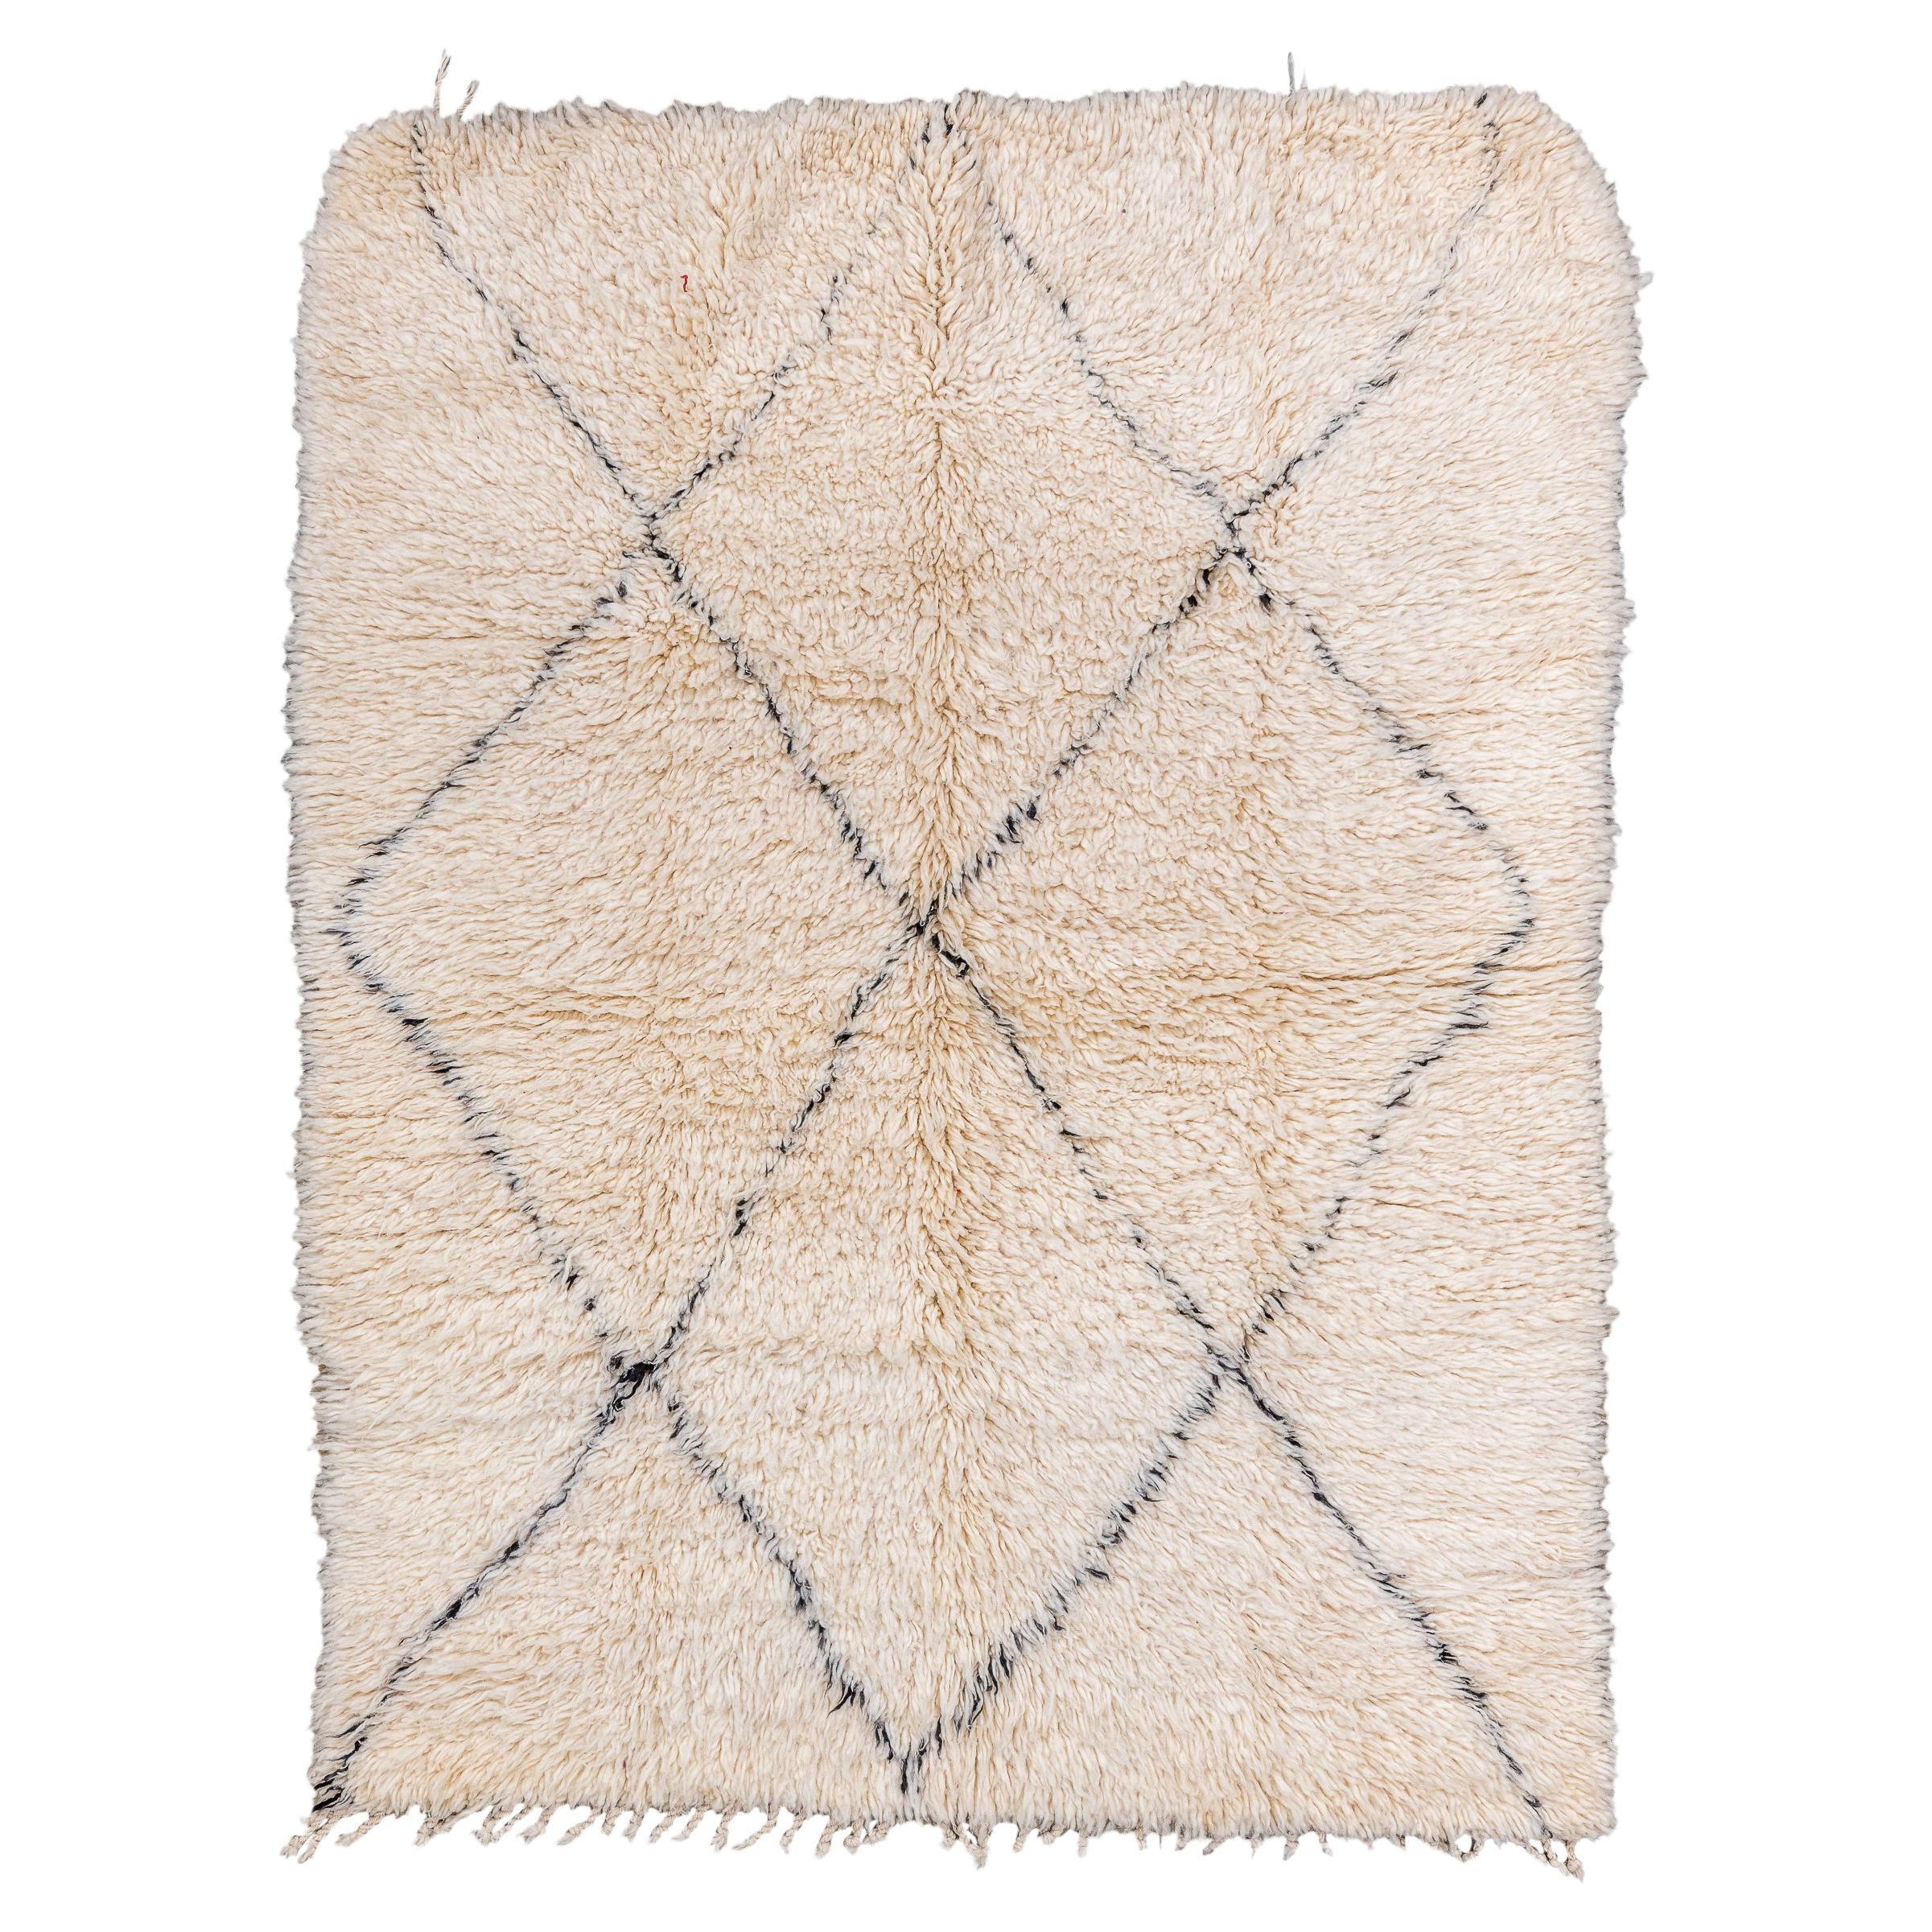 New and Modern Moroccan Design Rug